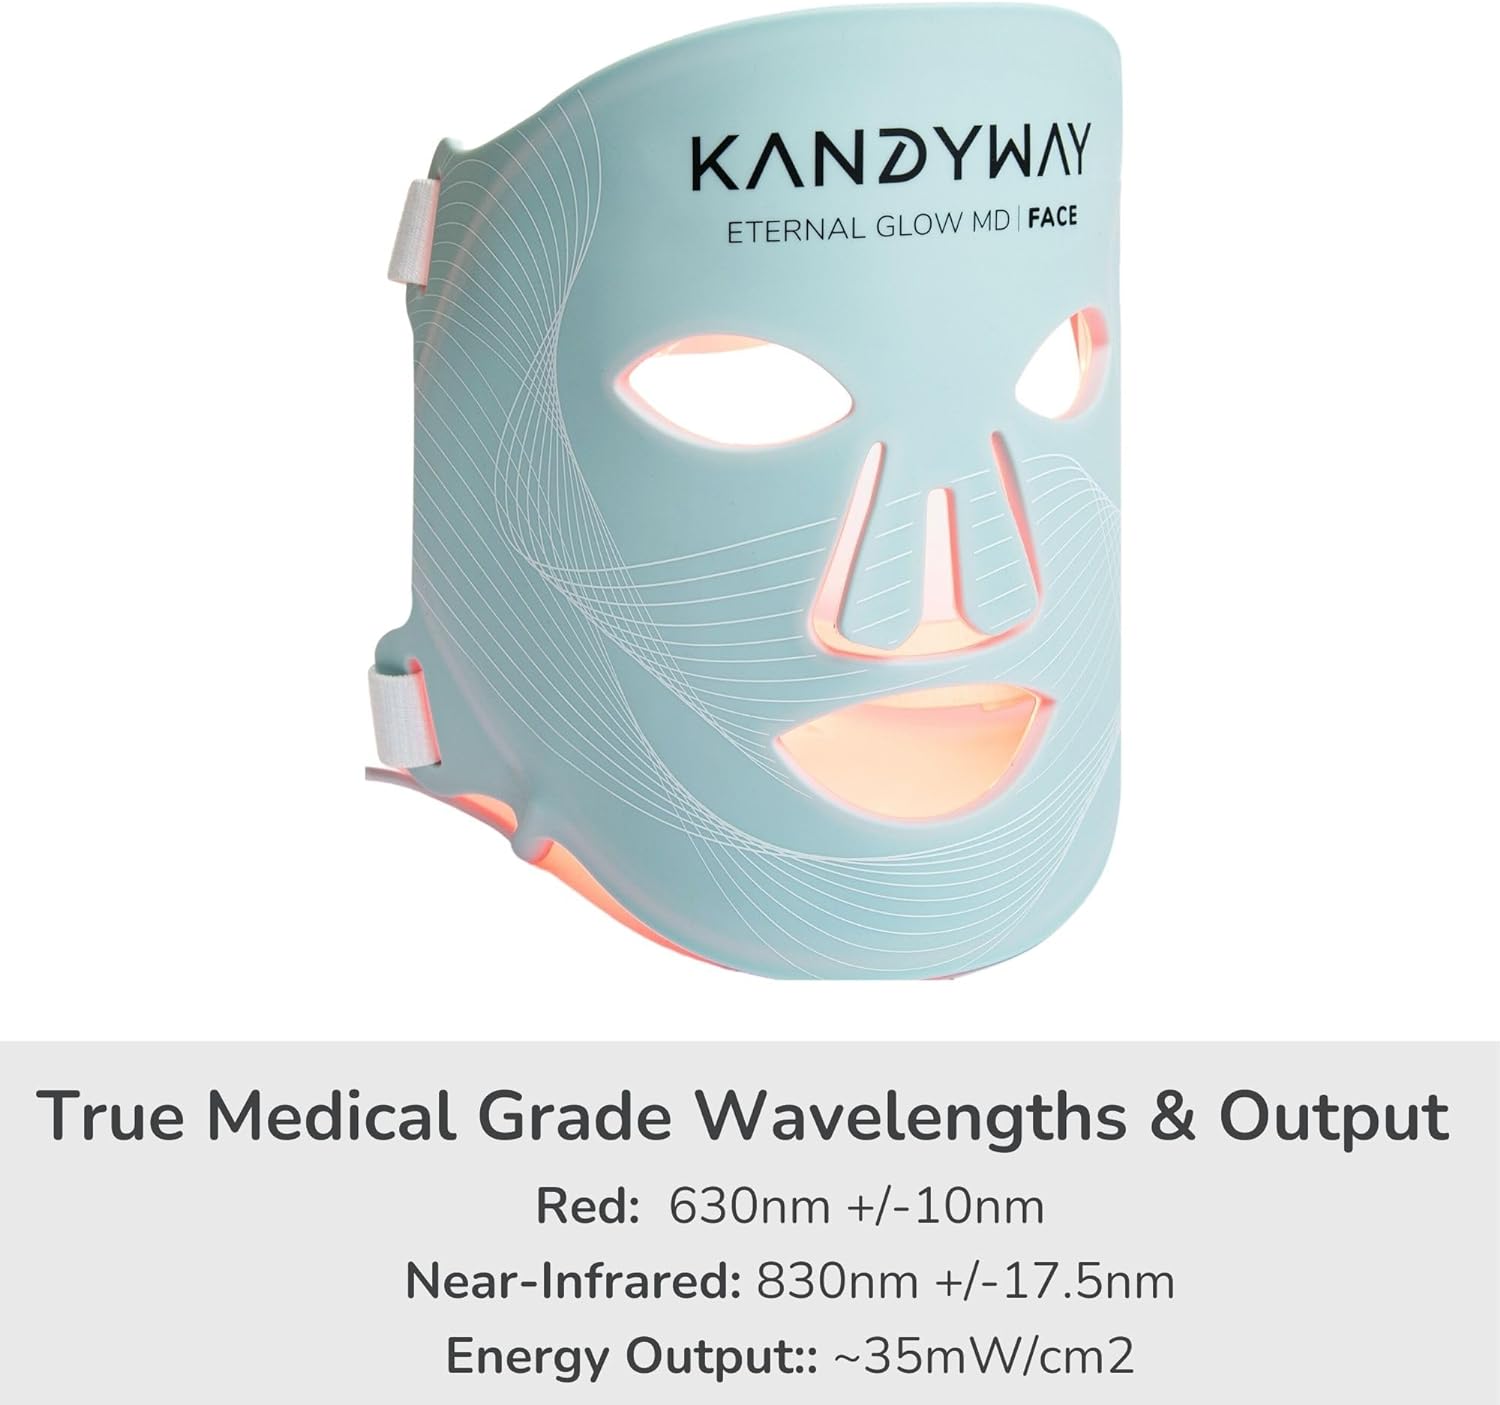 Red Light Therapy Mask - FDA Cleared, Medical Grade, Red Light Therapy for Face, Reduces Wrinkles, Scarring, Redenss, Improves Skin Tone, Speeds Up Wound Healing